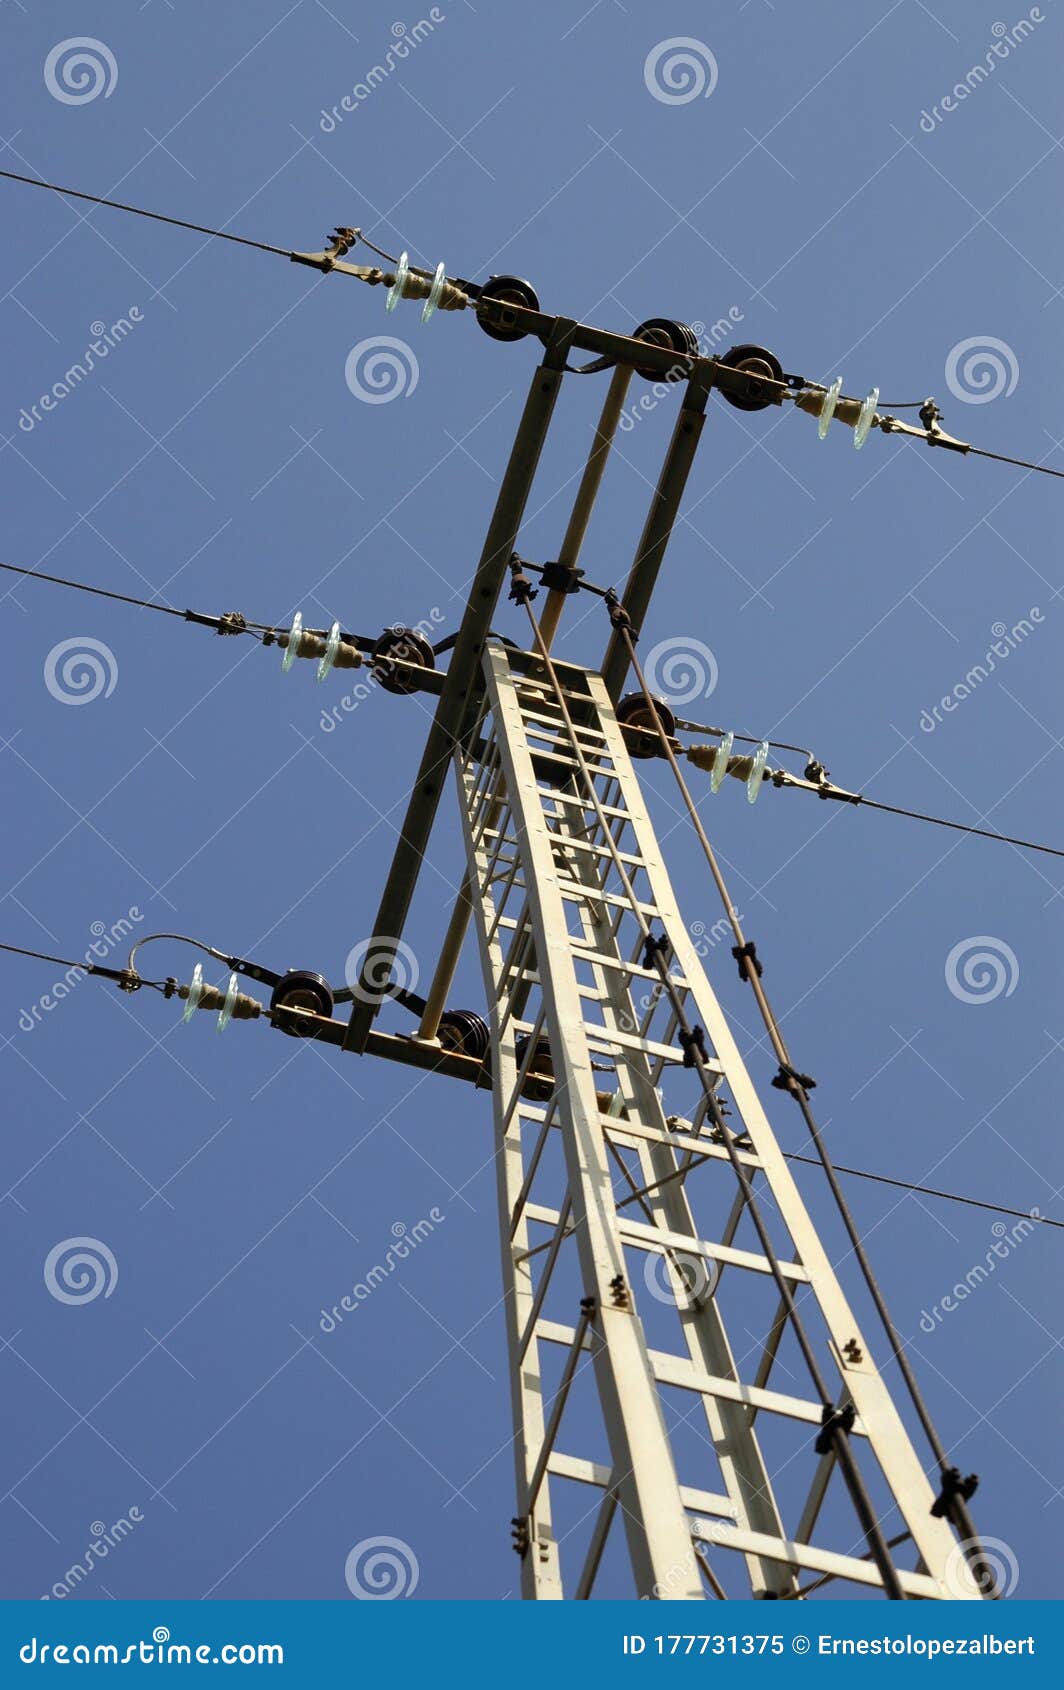 high voltage electric tower with sky in the background